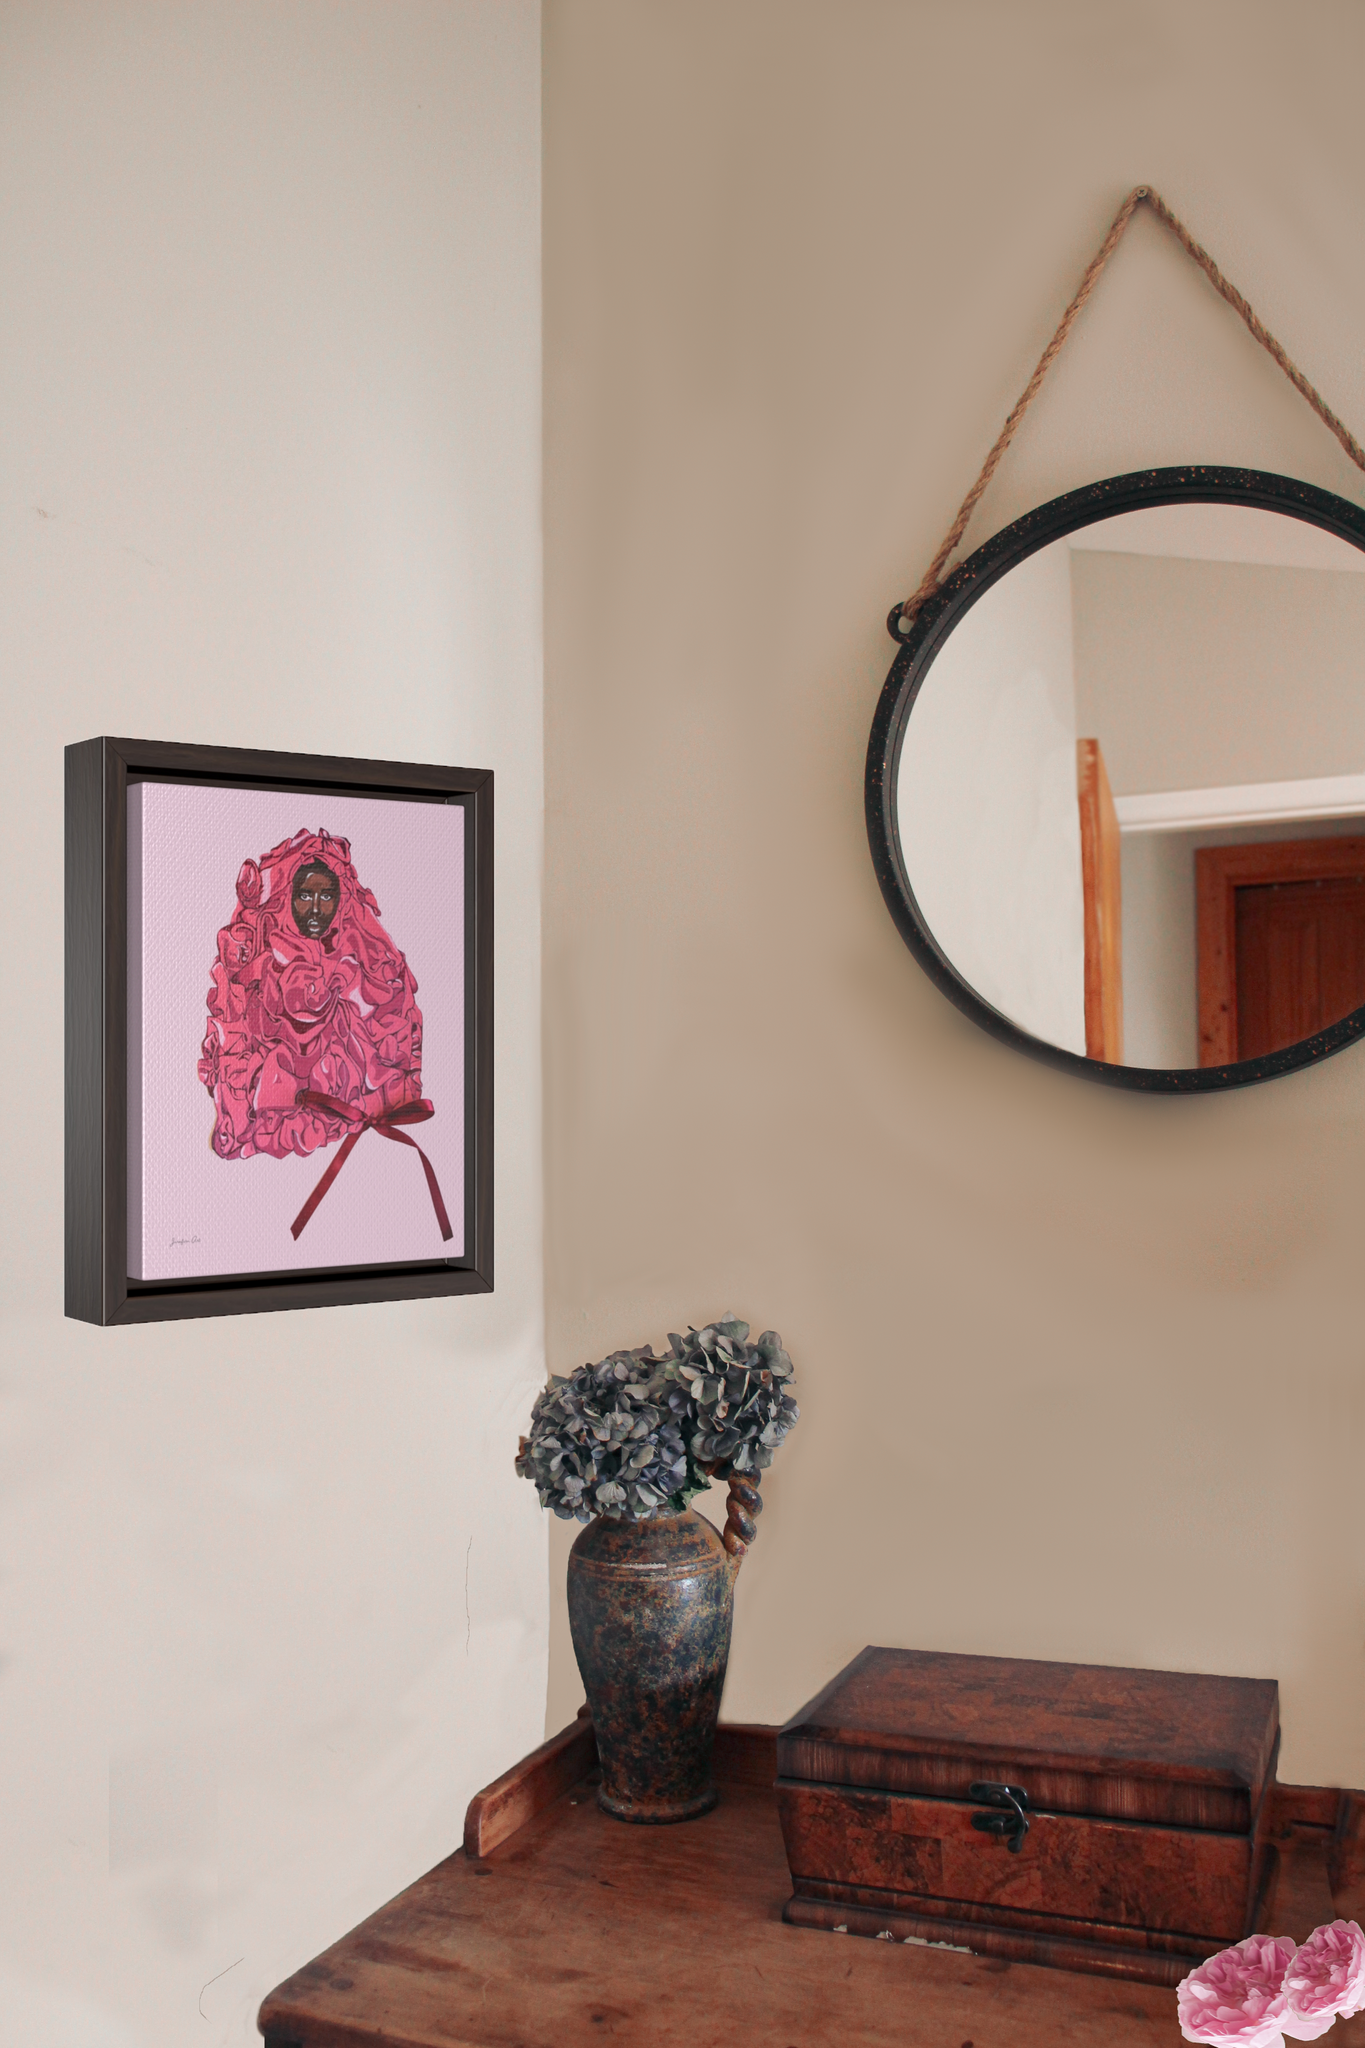 A framed gallery wrap canvas, with an illustration of model Adut Akech wearing a pink Valentino gown with a bow, with a light pink background, hanging on a wall next to a desk with a vase of flowers and a jewelry box